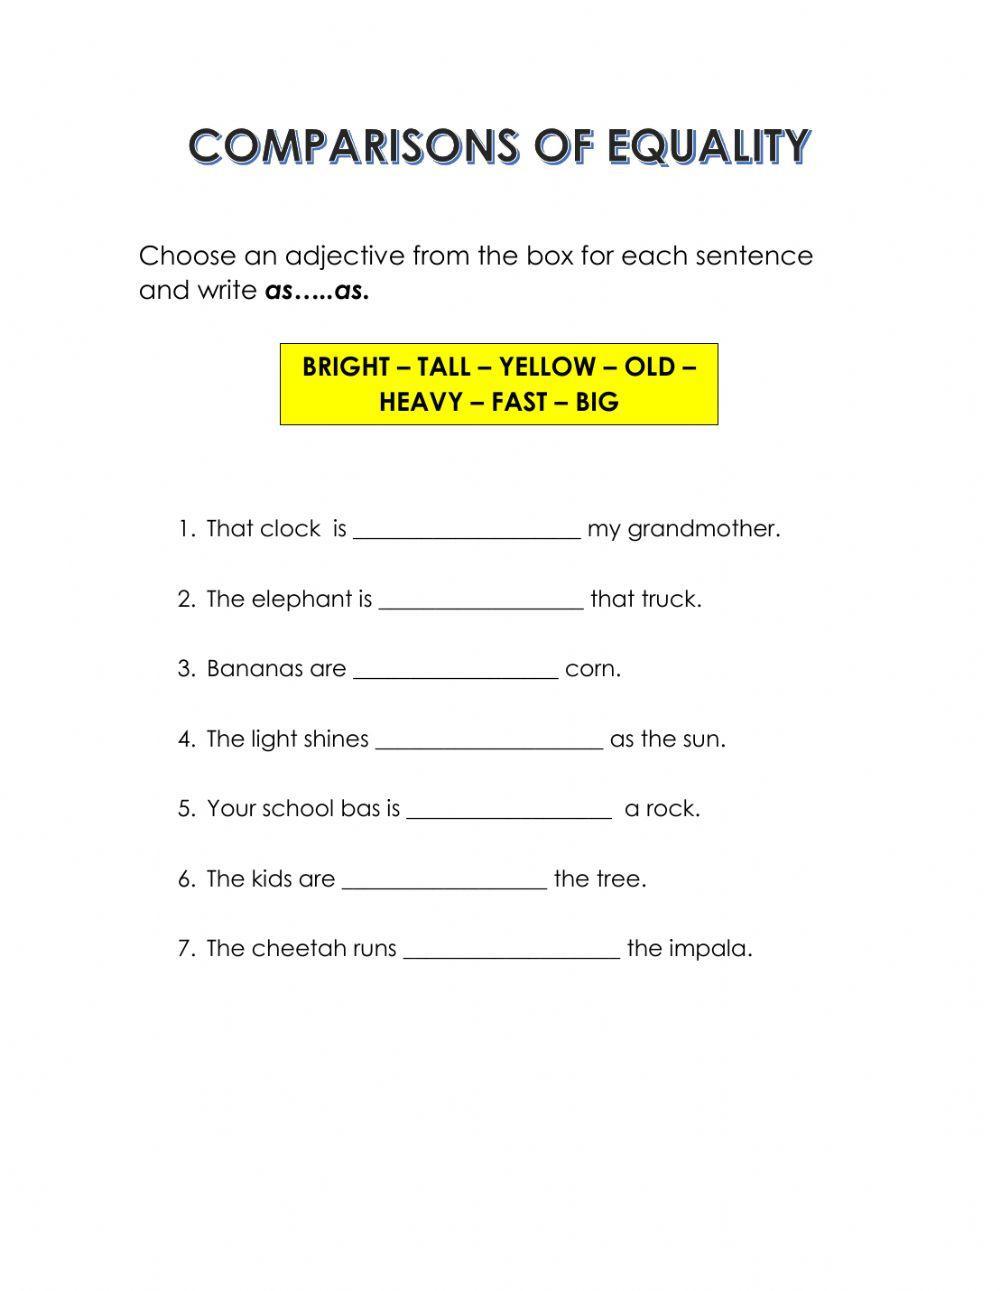 Comparisons of equality